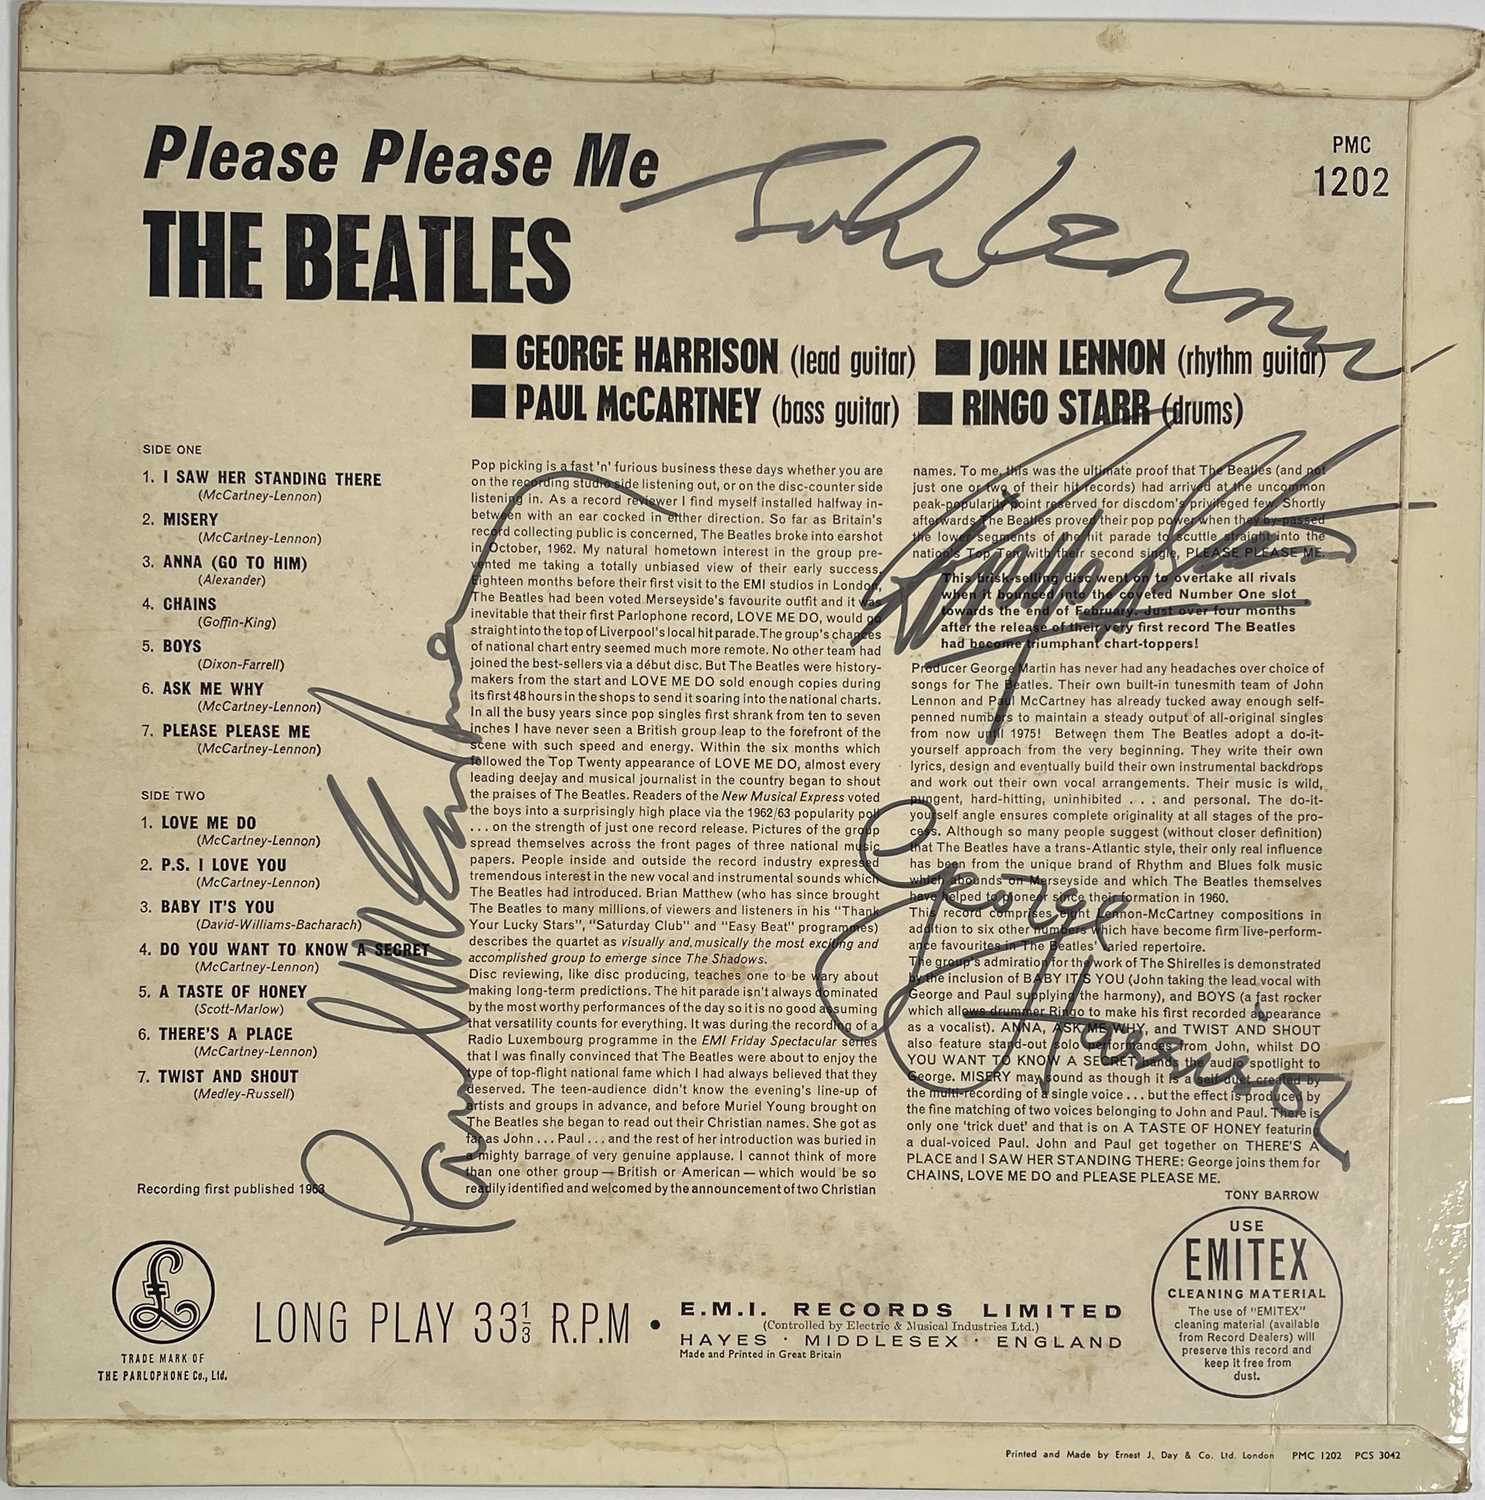 THE BEATLES - A FULLY SIGNED COPY OF PLEASE PLEASE ME.